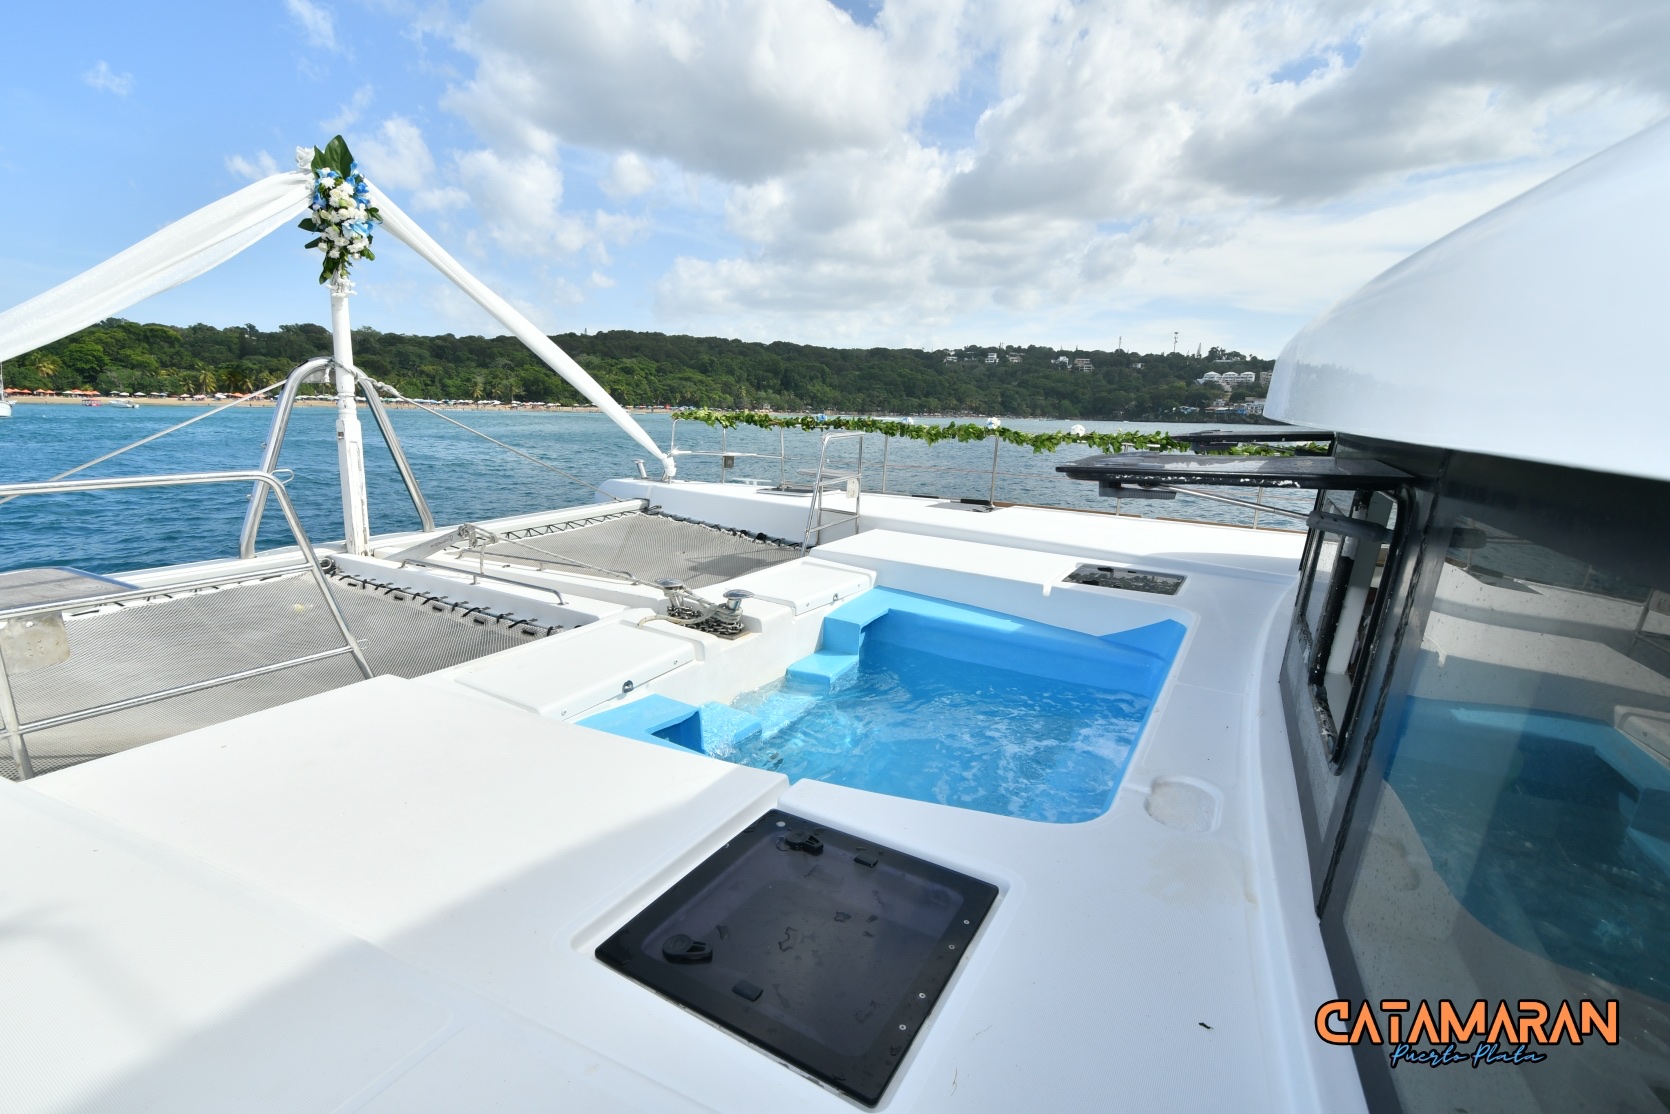 The onboard Jacuzzi is a must for passengers